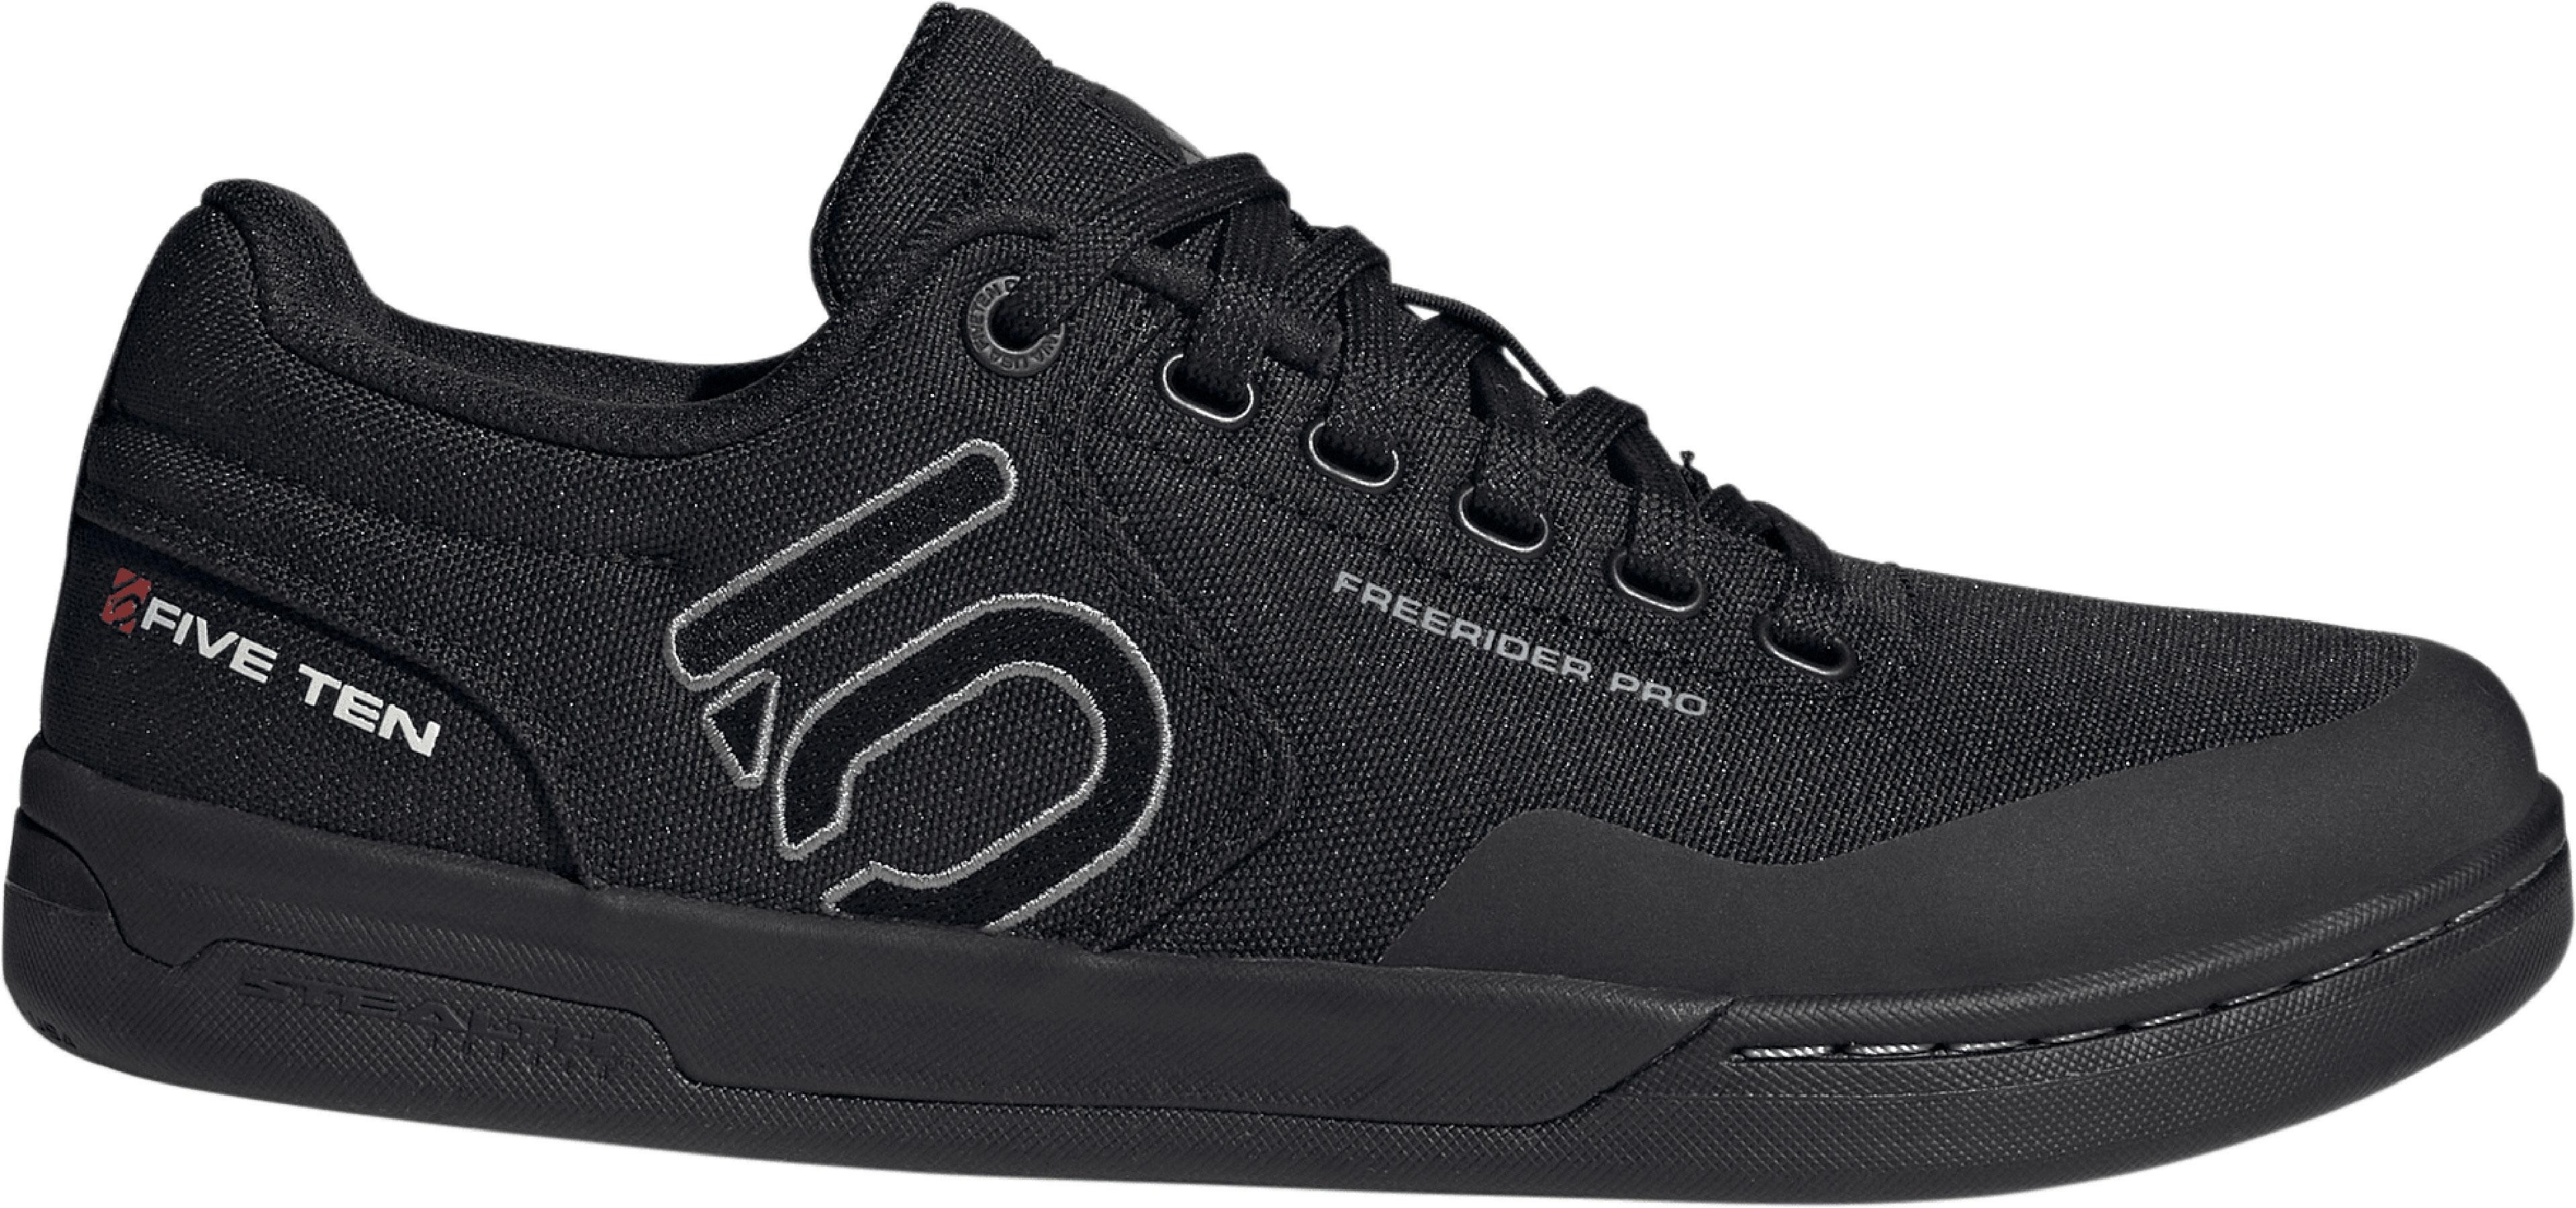 Five Ten Freerider Pro Canvas Cycle Shoes - Core Black/grey Three/core White